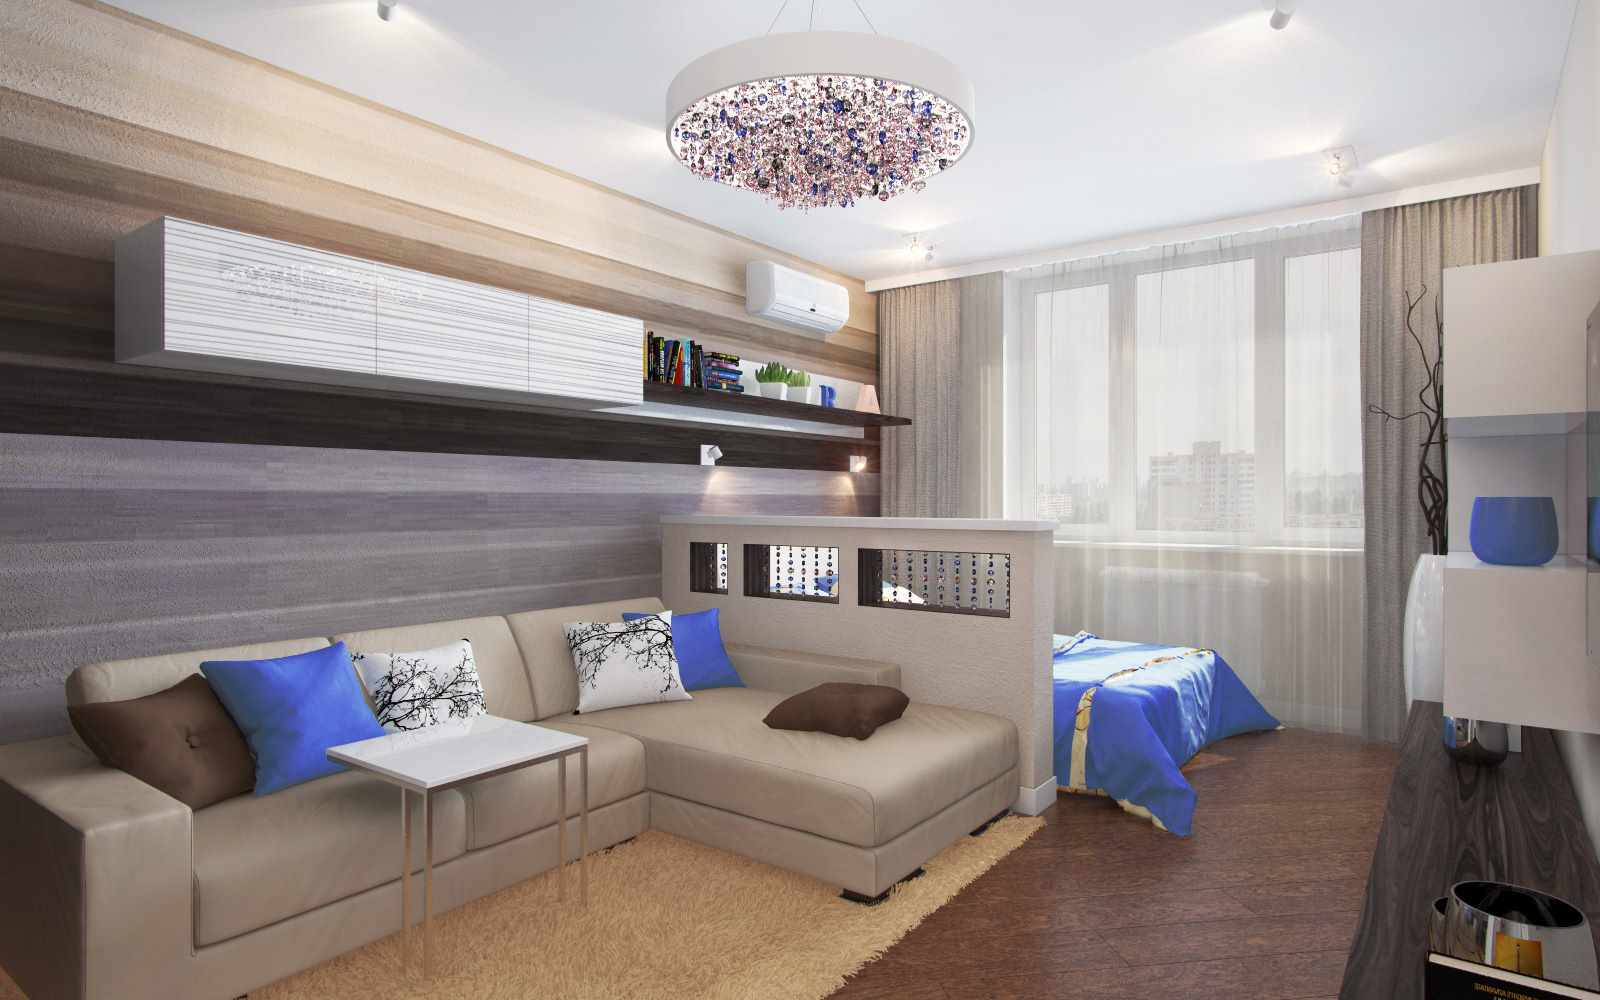 An example of a light bedroom decor of 15 sq.m